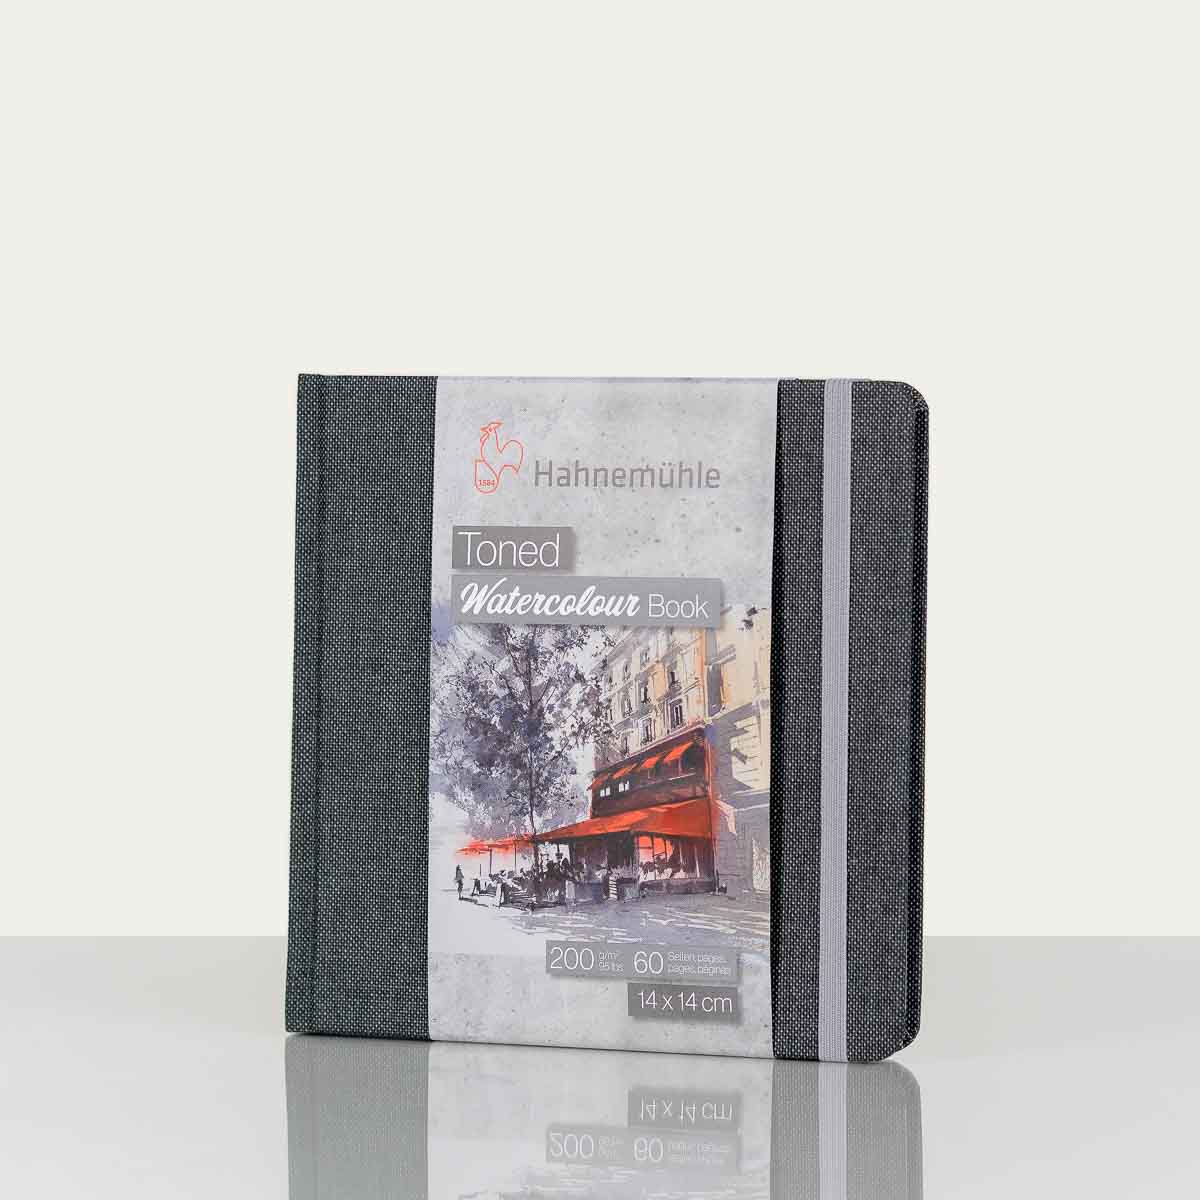 Traditional Hahnemuhle Toned Watercolour Book Grey 200gsm 14x14cm 30sheets/60pages